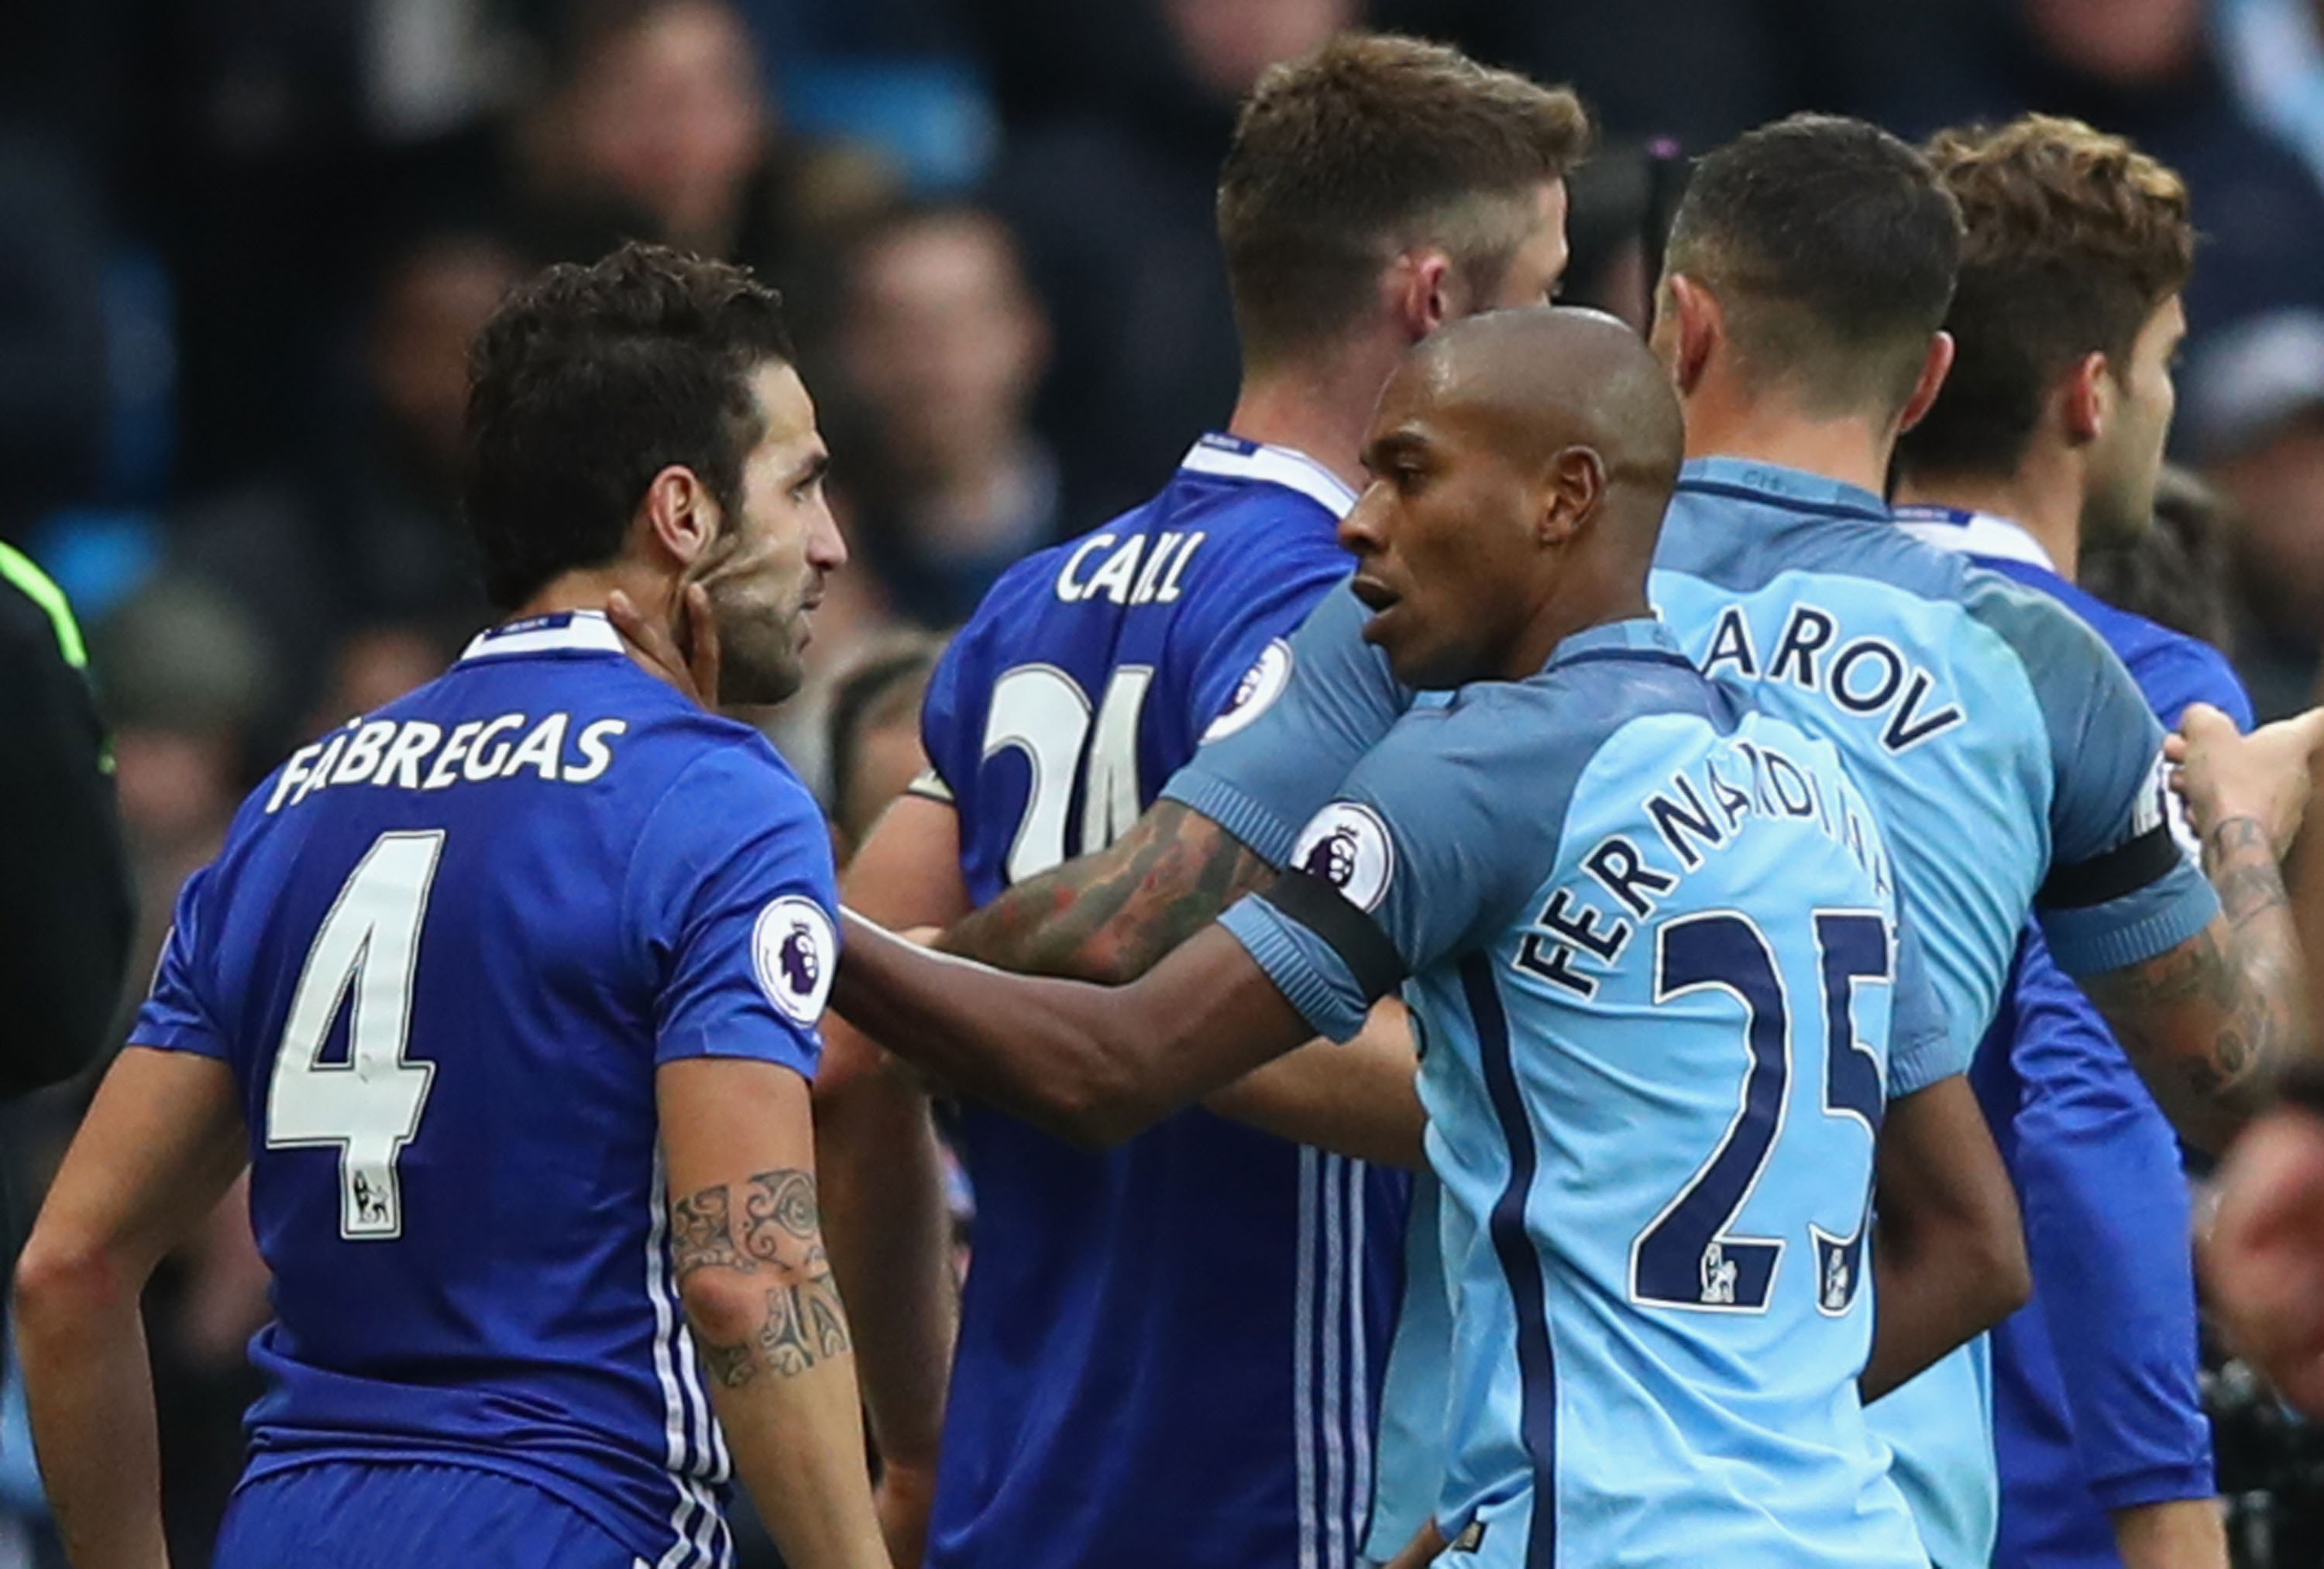 Aguero deserves the ban, but what Fabregas did was equally cringe-worthy